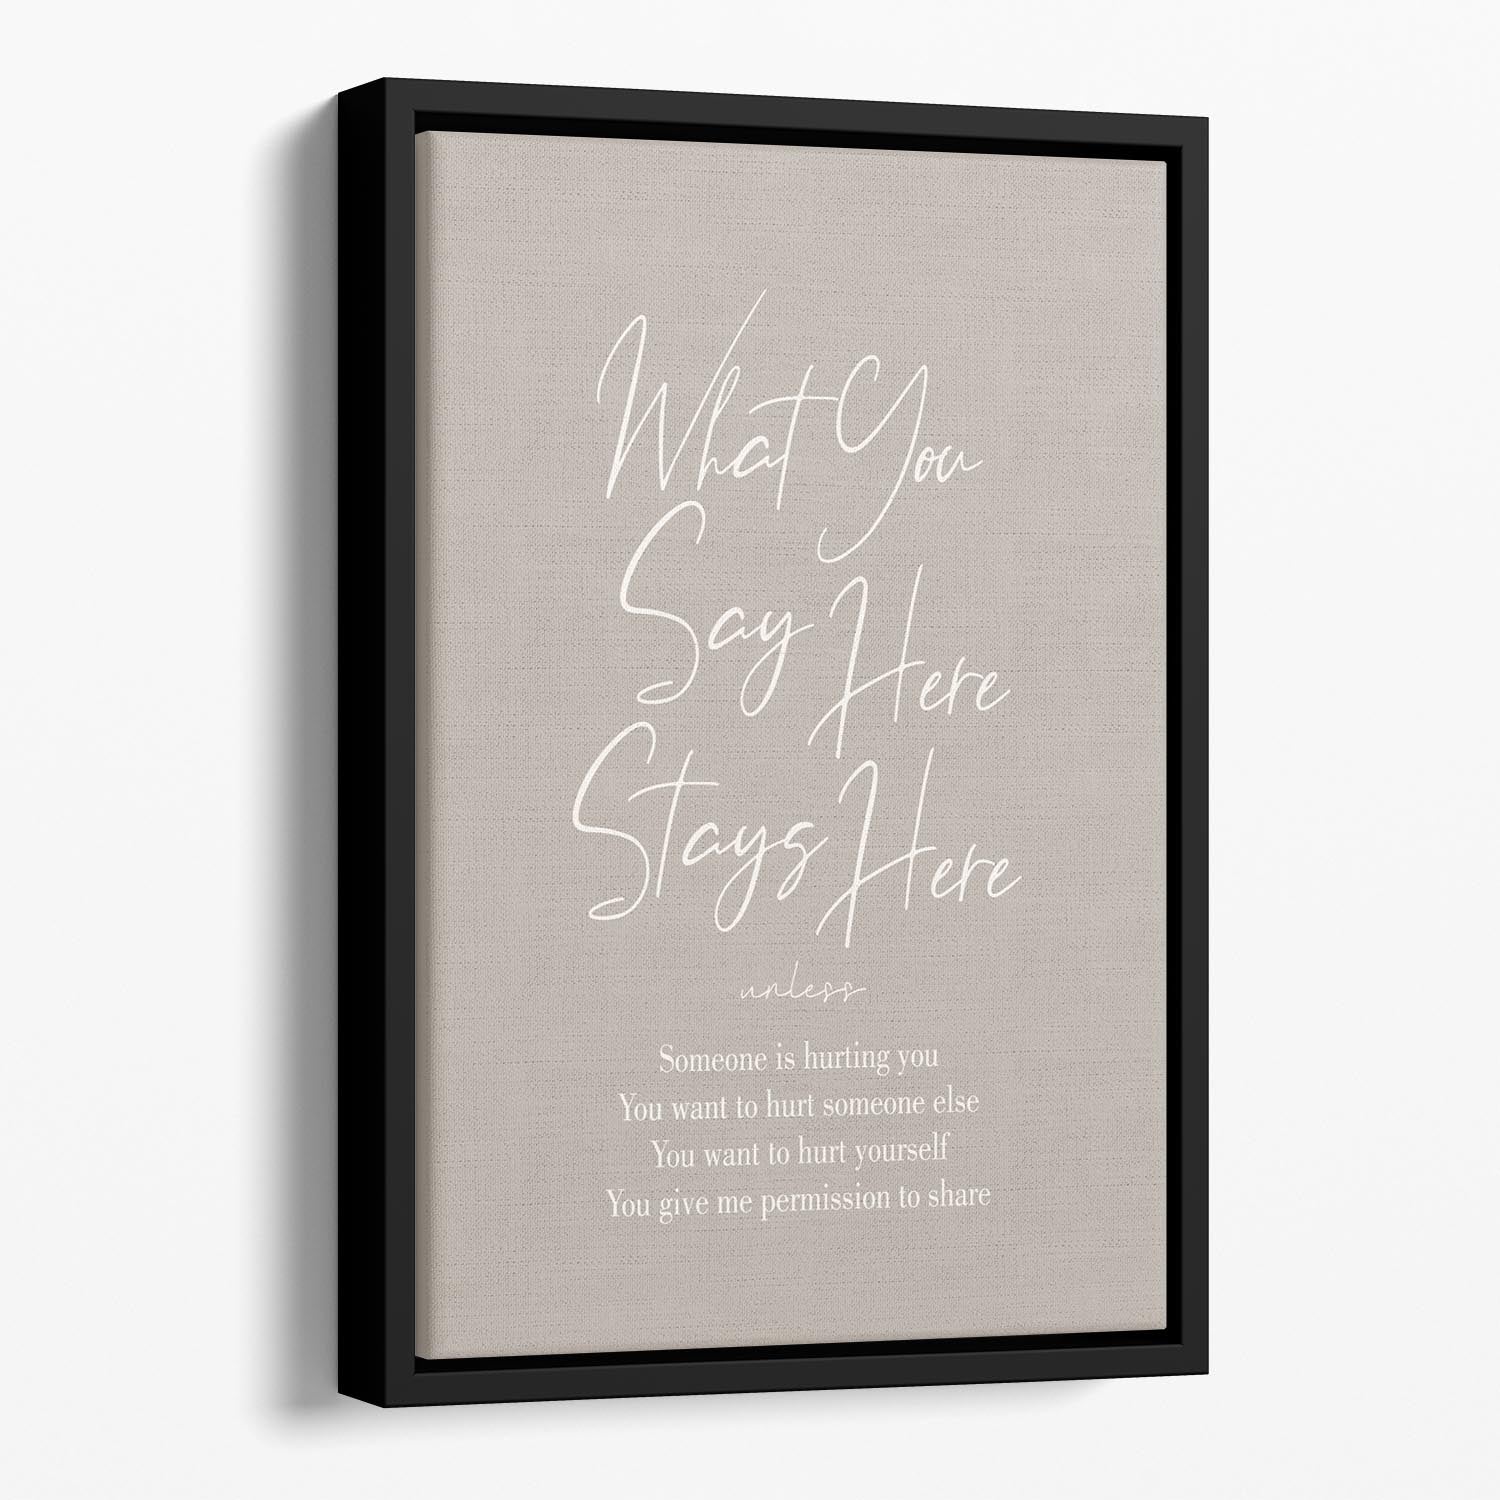 Say Here Stays Here Unless Floating Framed Canvas - Canvas Art Rocks - 1